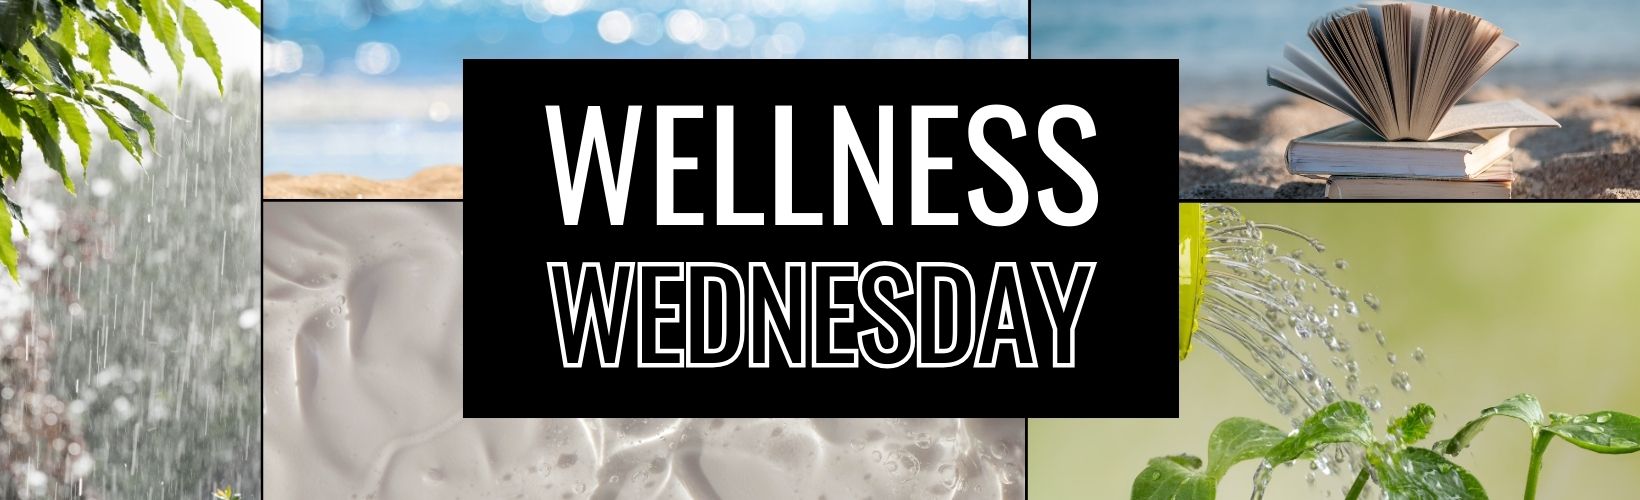 Wellness Wednesday 🙏: 5 Simple Tips to Boost Your Energy